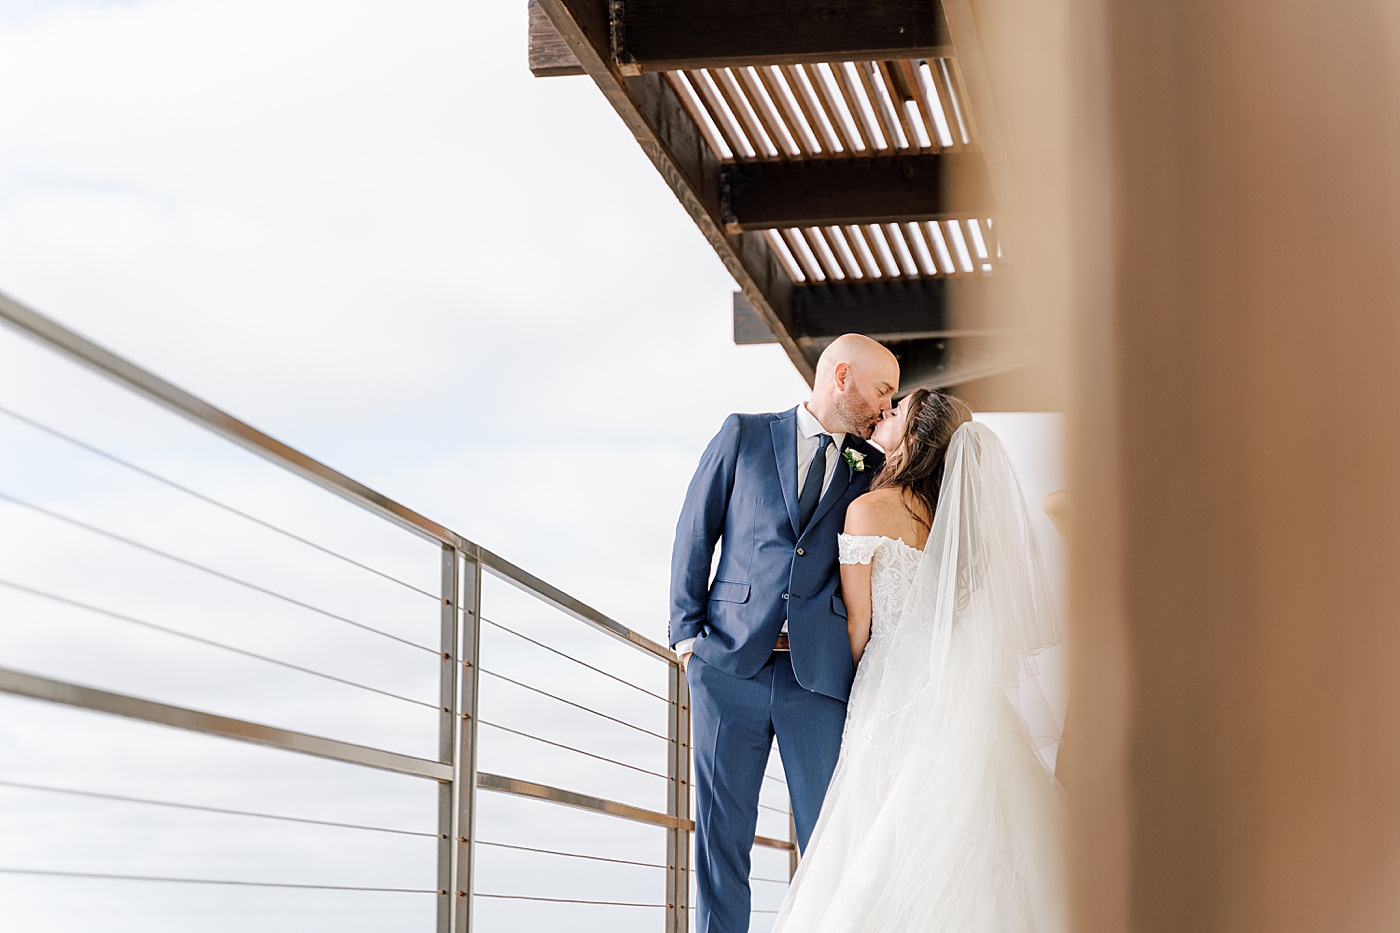 Groom in navy suit and bride in wedding dress standing closely and kissing on a wooden balcony | Image by Hope Helmuth Photography